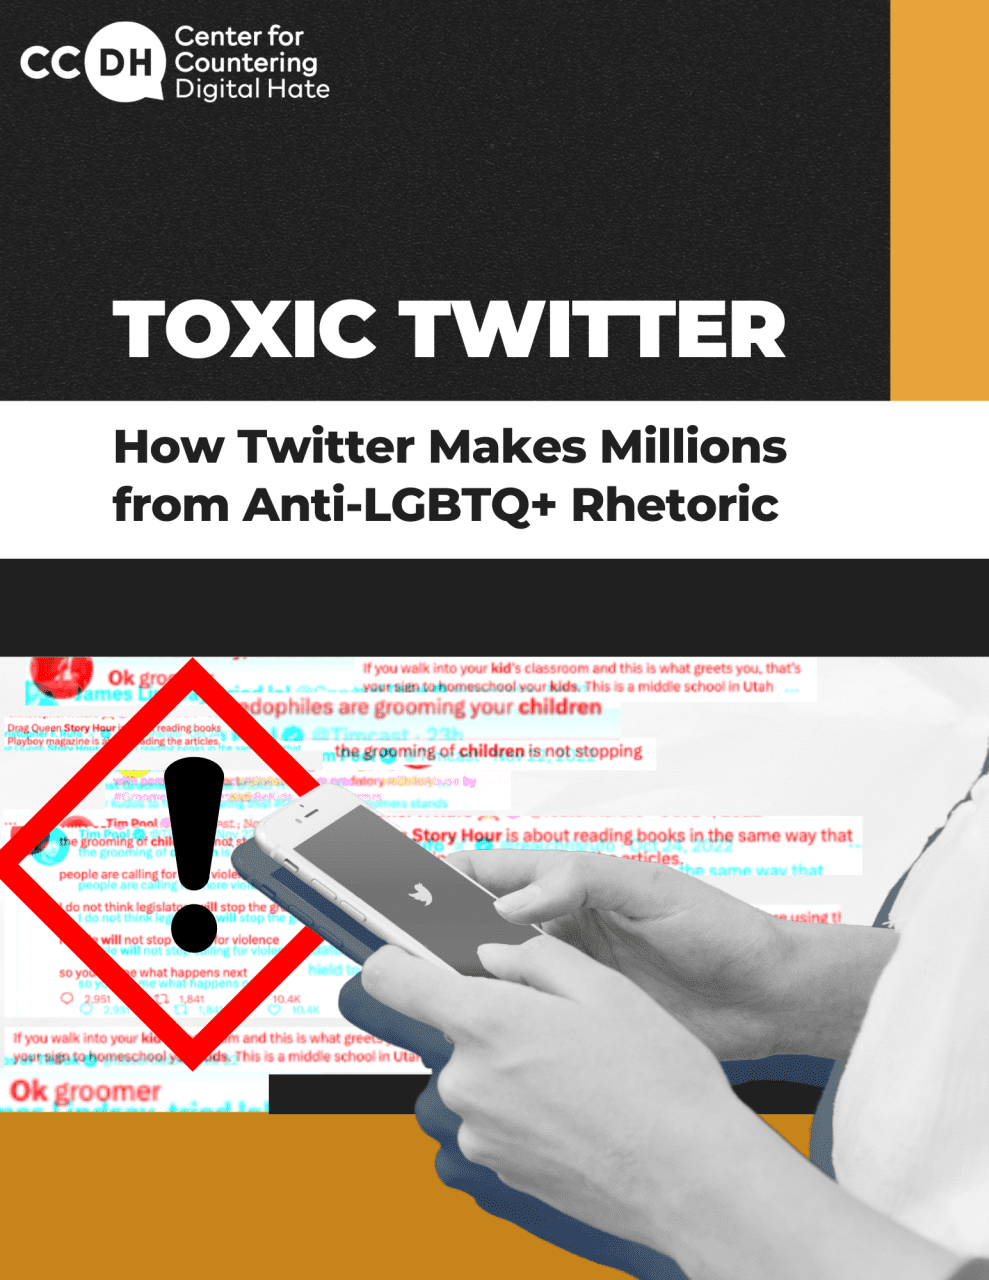 Cover of report includes title "Toxic Twitter. How Twitter Makes Millions from Anti-LGBTQ+ Rhetoric" and distorted screenshots of tweets containing 'grooming' narrative.